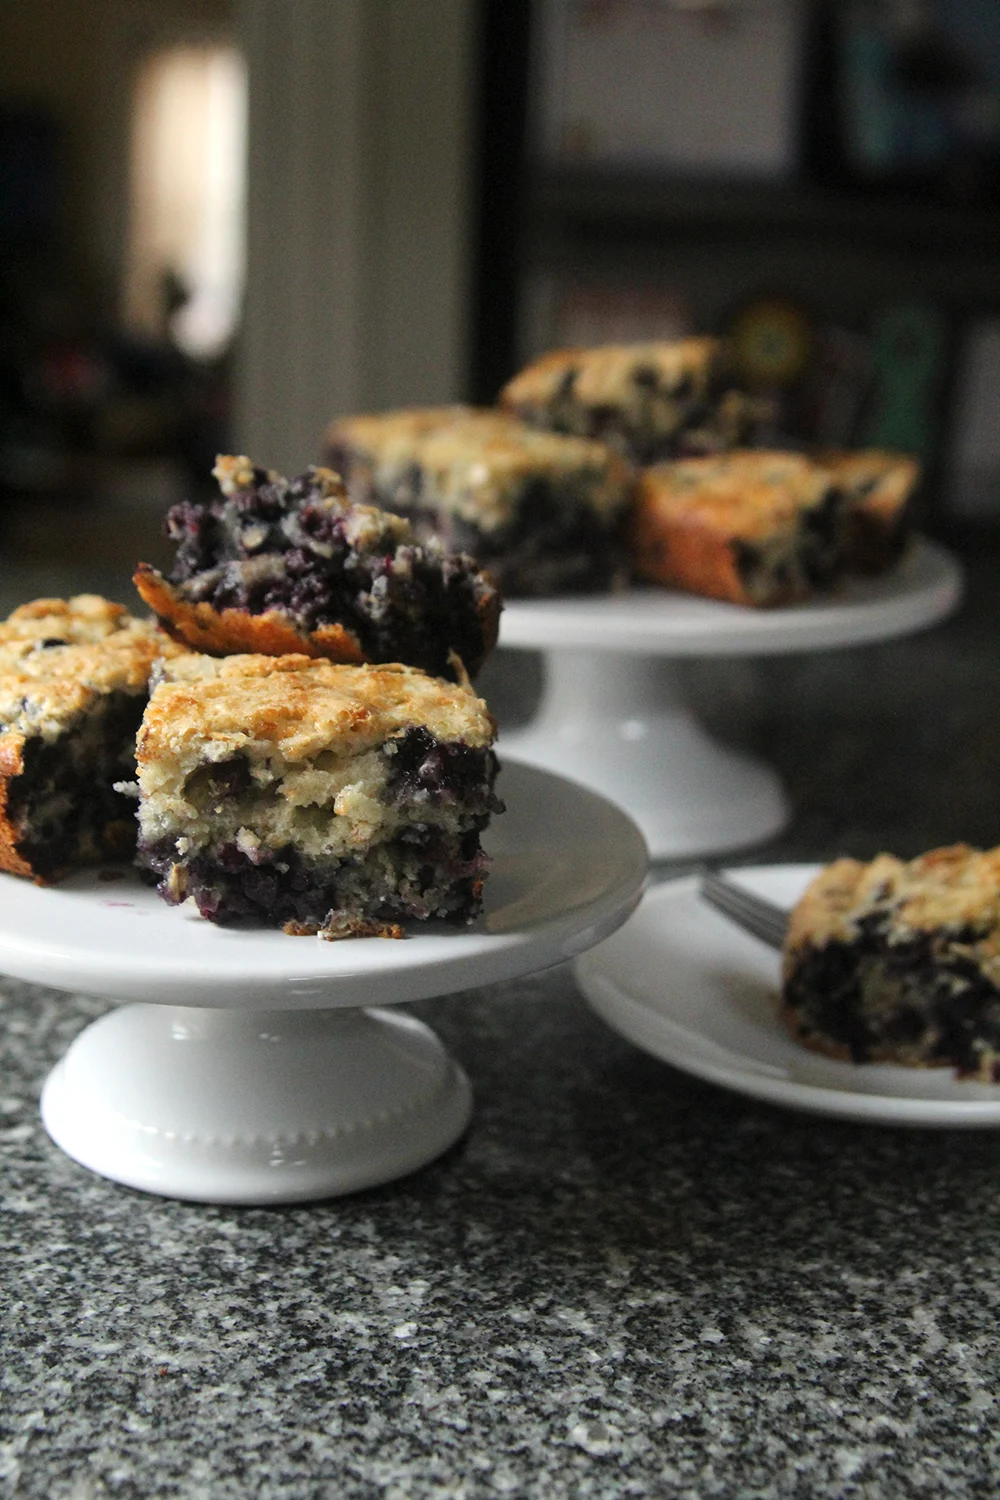 Piles of Blueberry Oatmeal Cake sit on two white cake plates. A small white plate holds another piece with a silver fork.